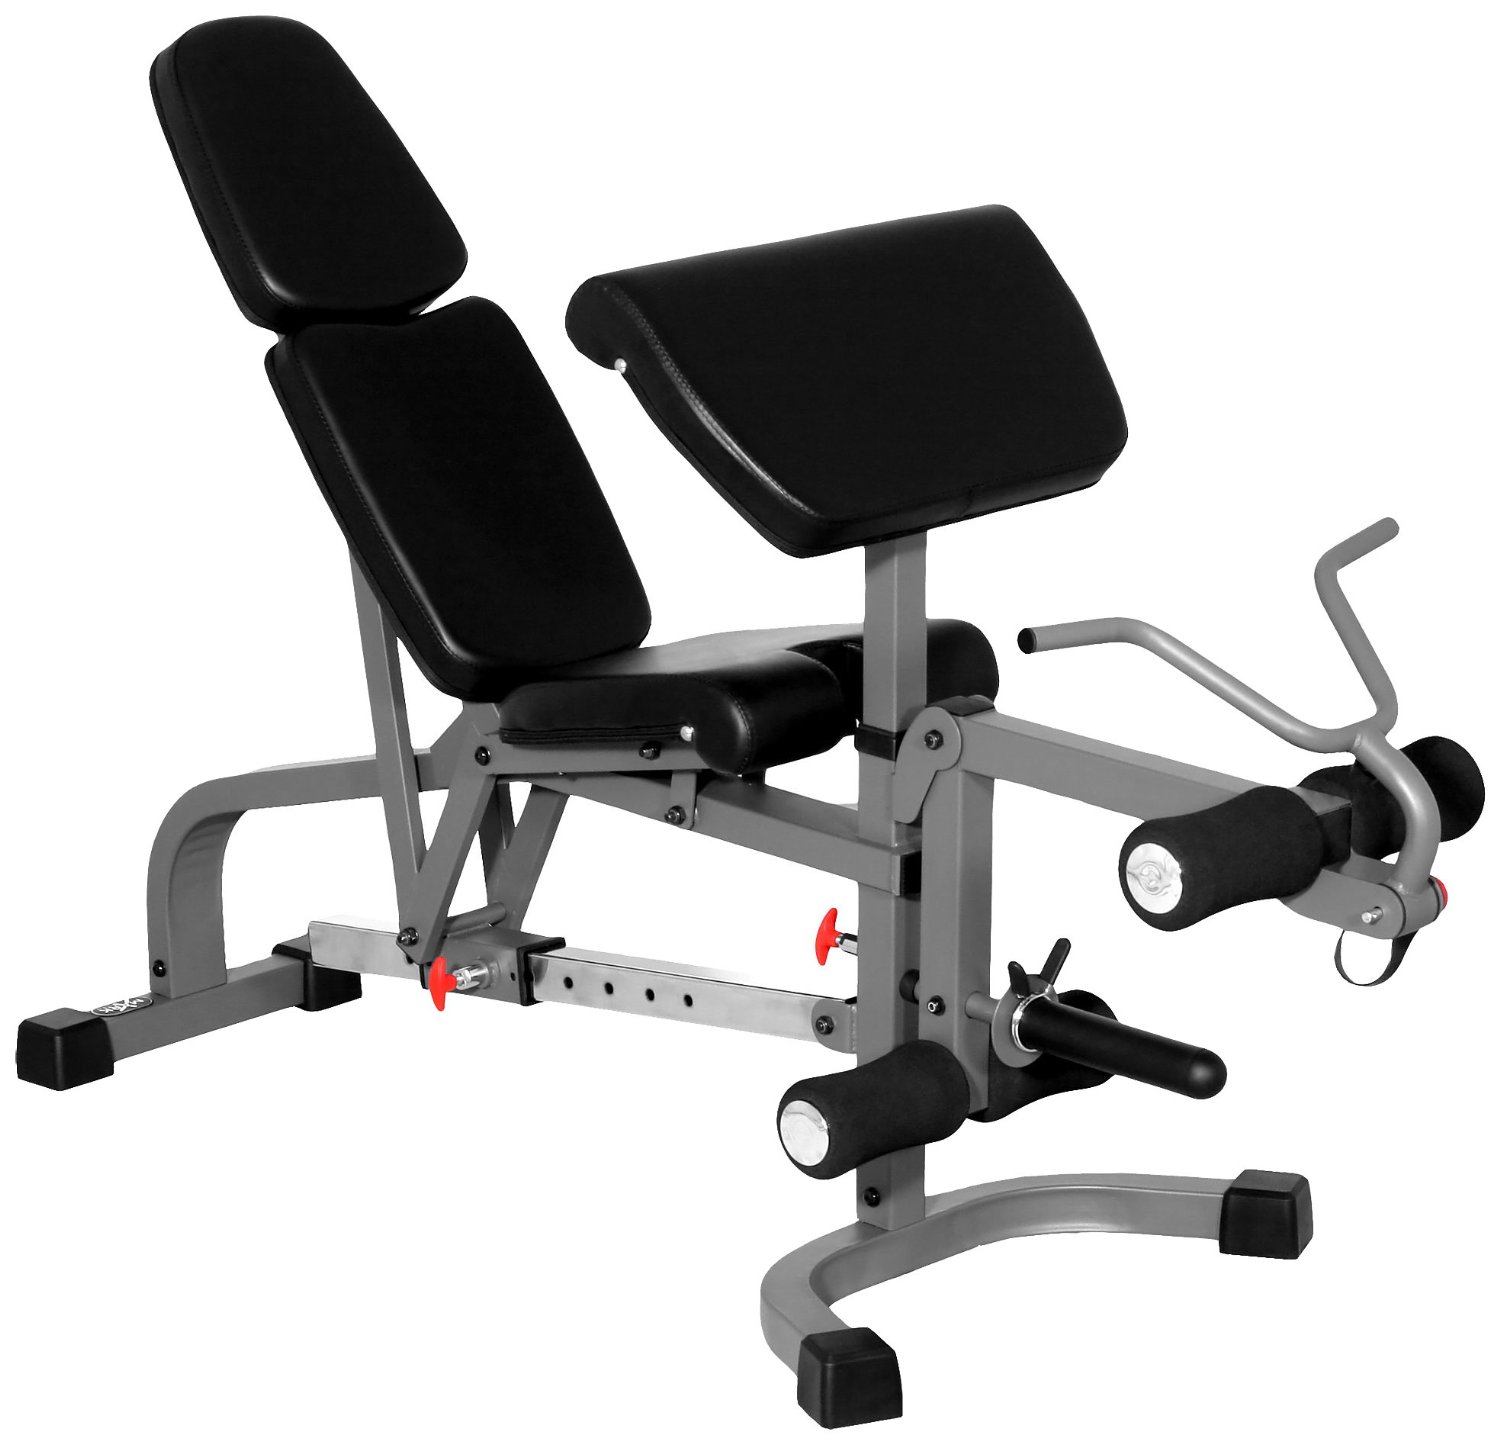 XMark FID Flat Incline Decline Weight Bench with Leg Extension and Preacher Curl XM-4419